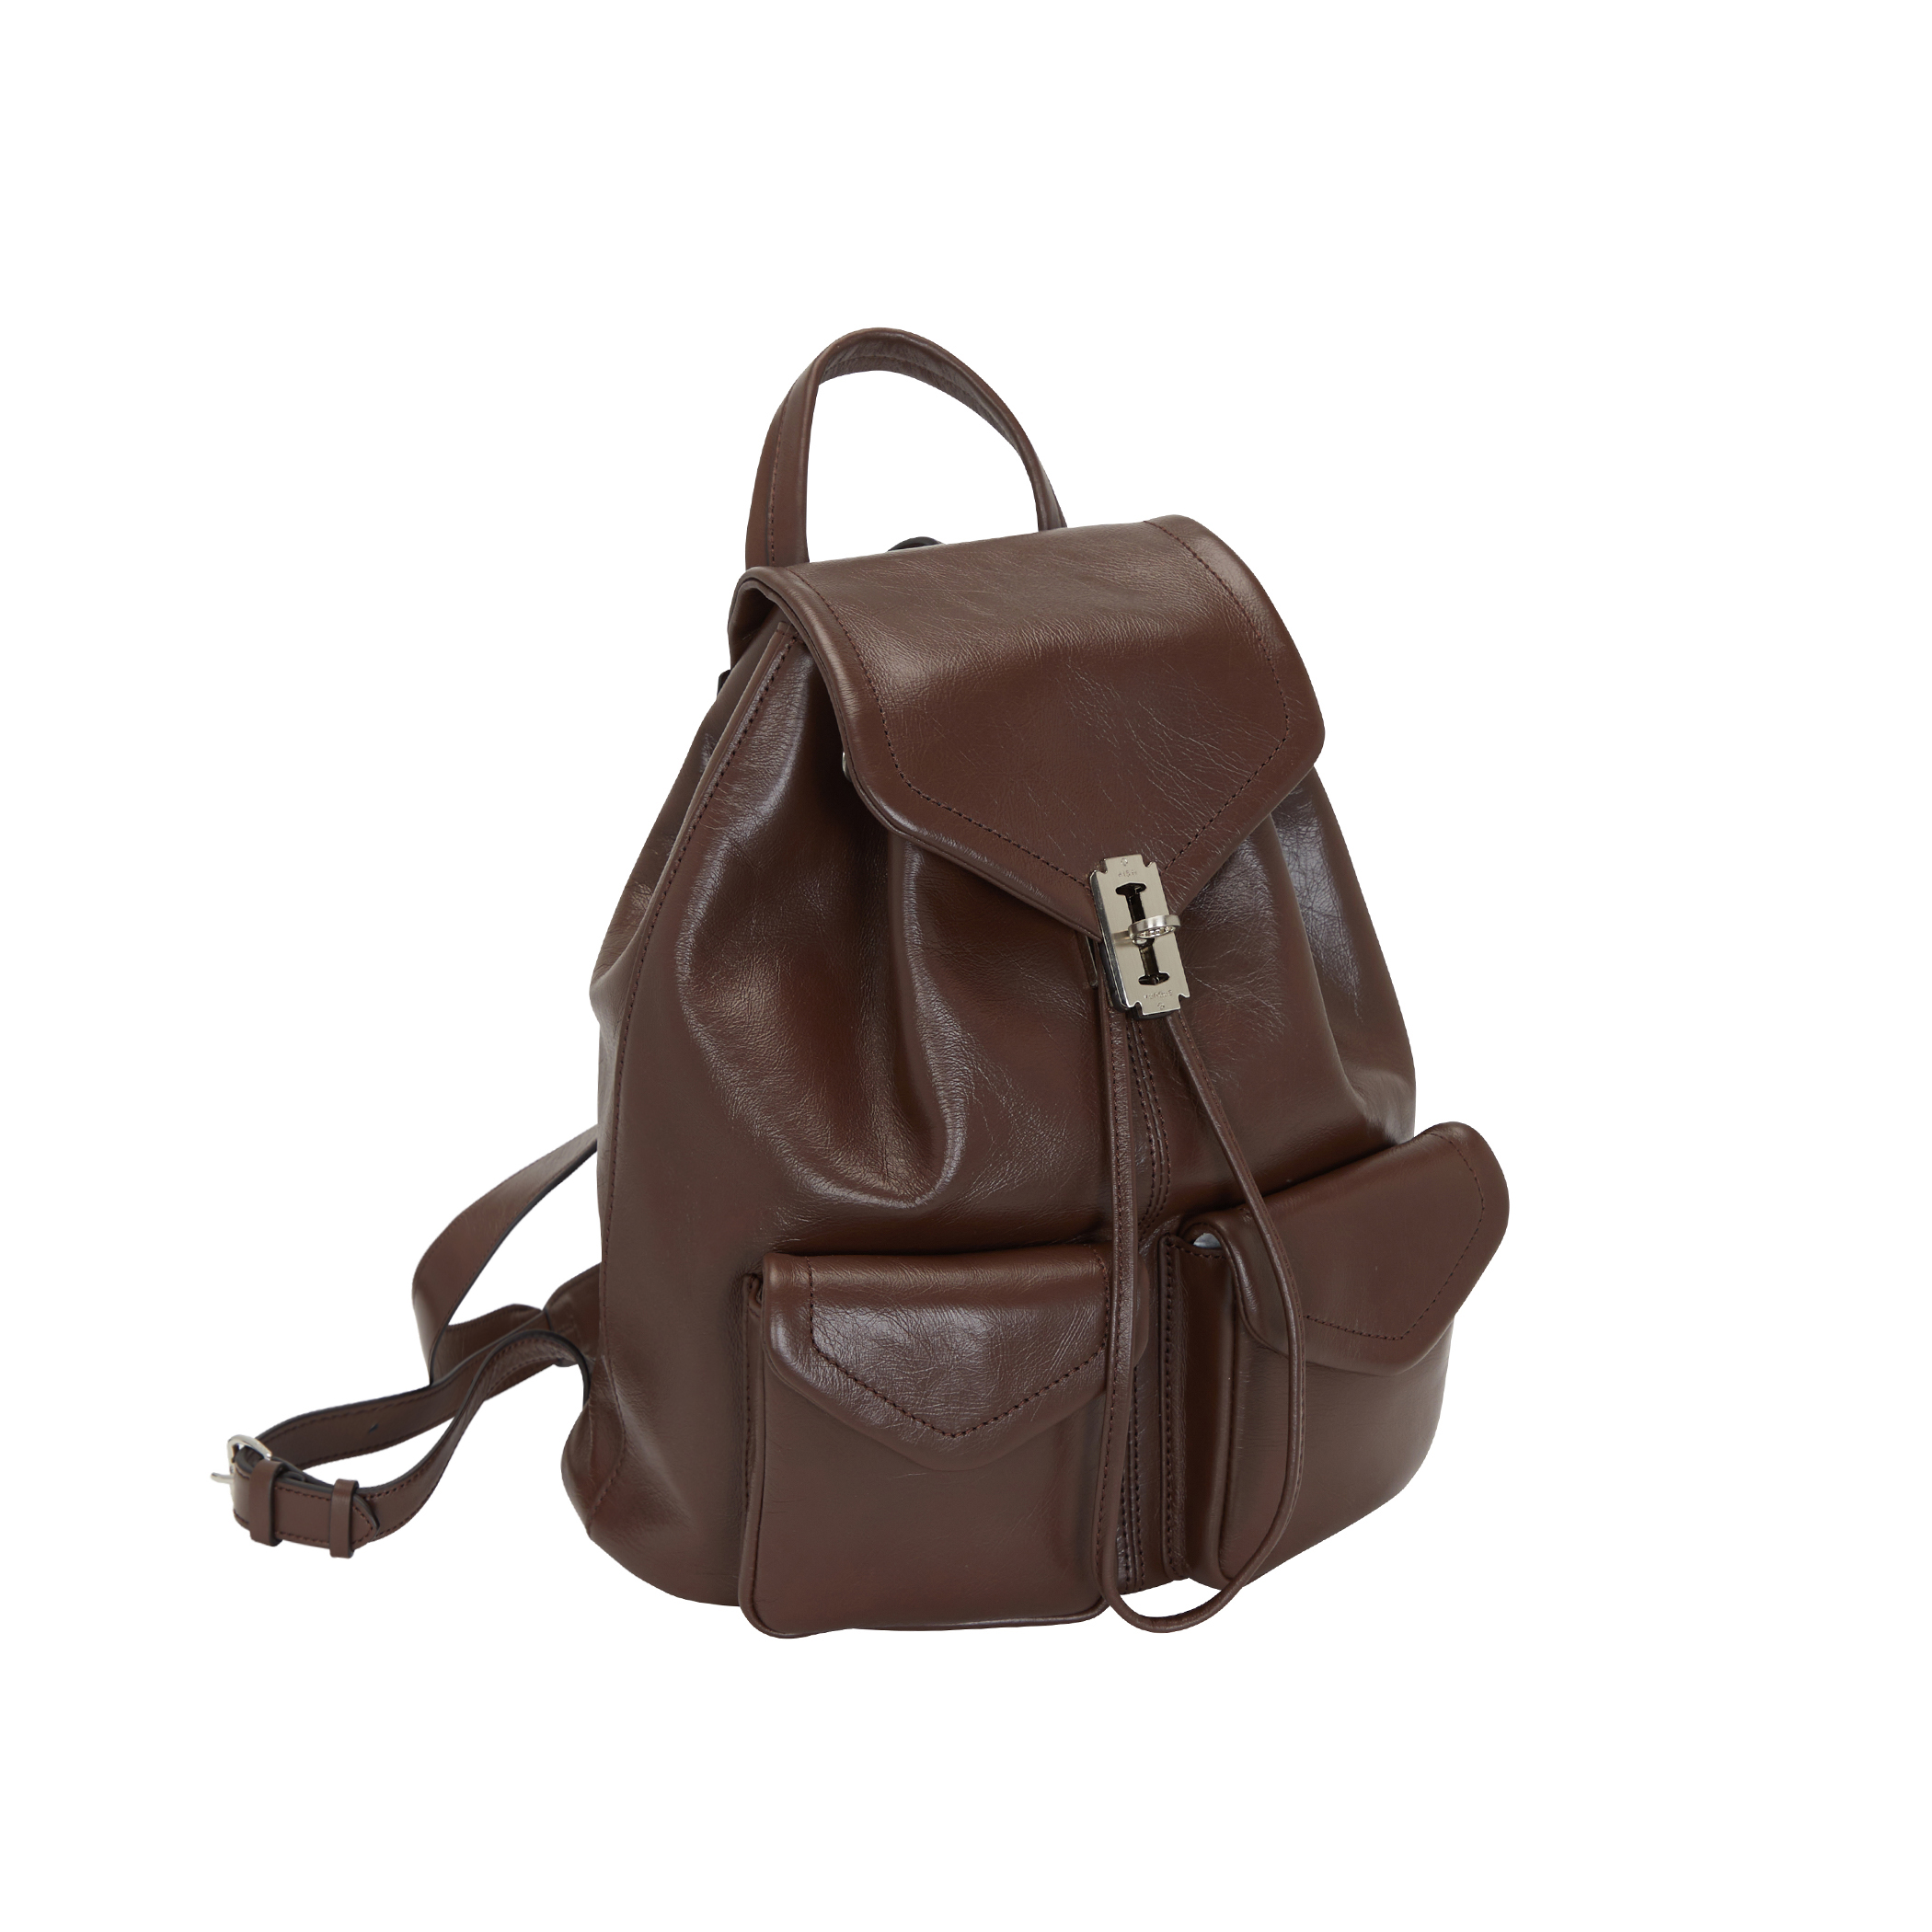 Occam Doux double pocket Backpack M (오캄 두 더블 포켓 백팩 미듐) Choco Brown